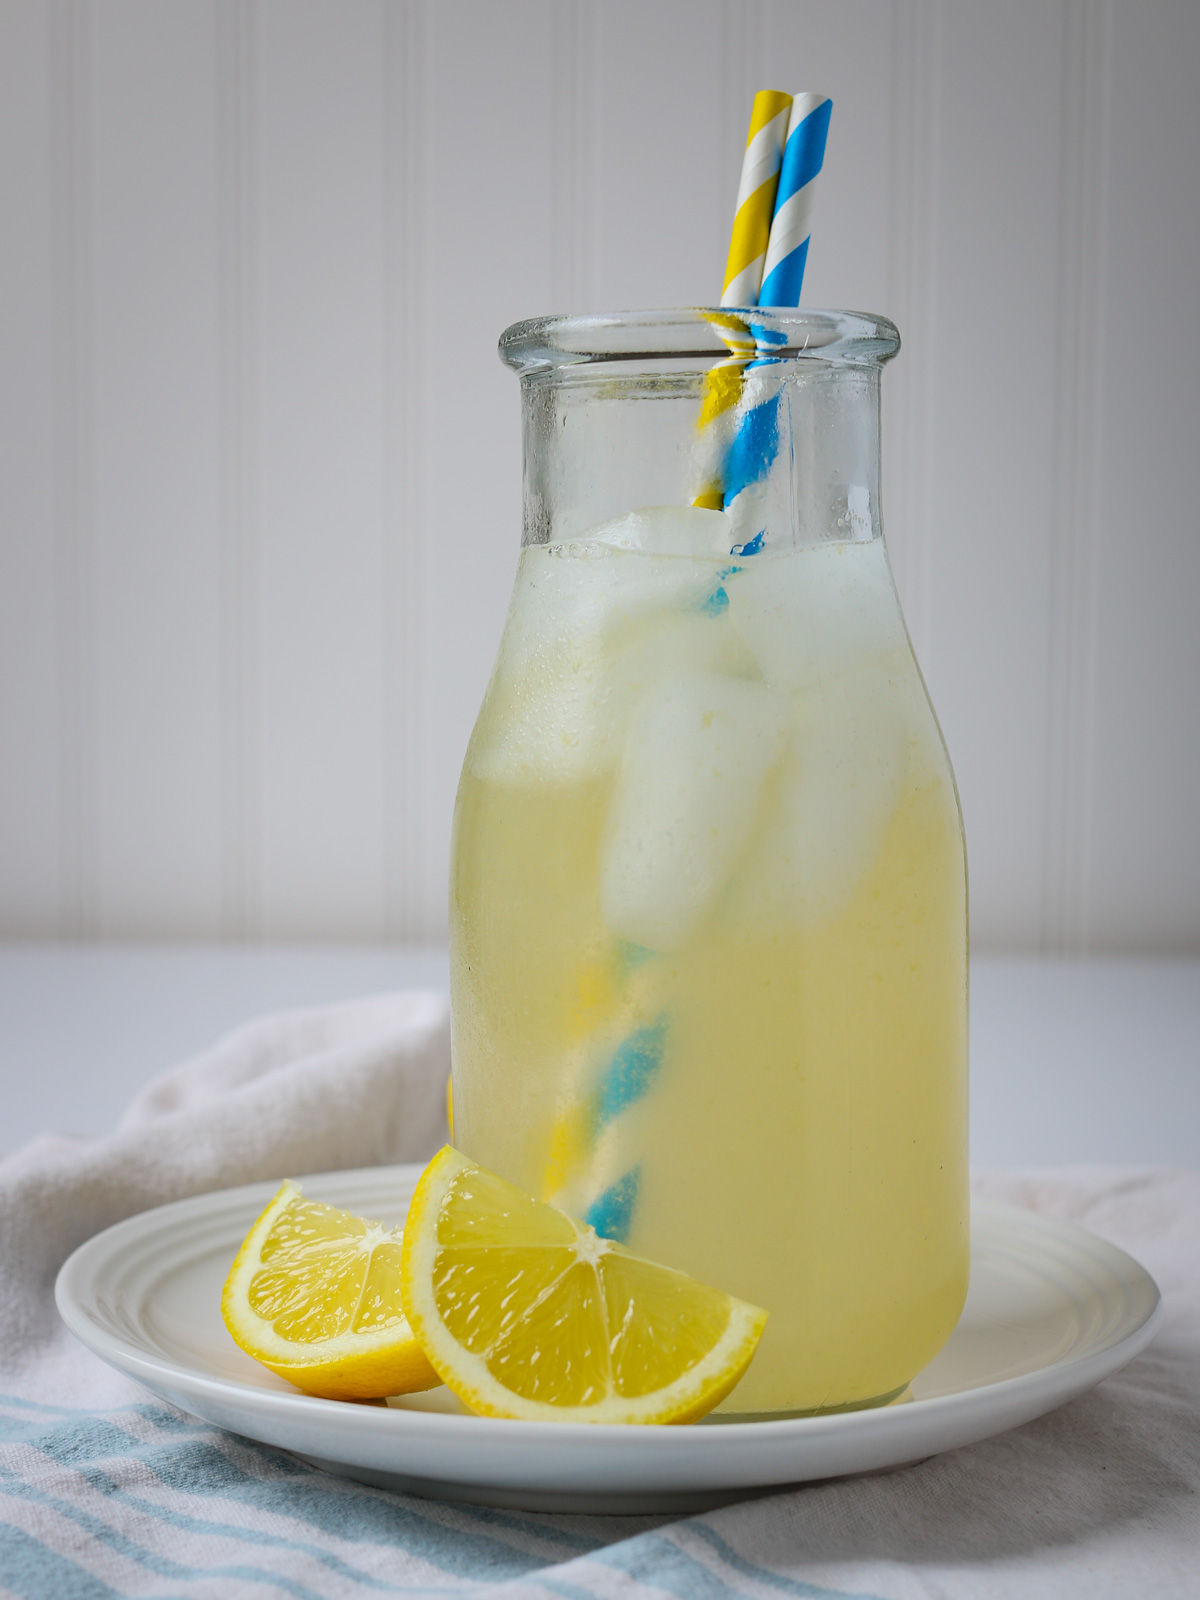 glass milk jar full of ginger lemonade with blue and yellow straws, ice, and lemon wedges.